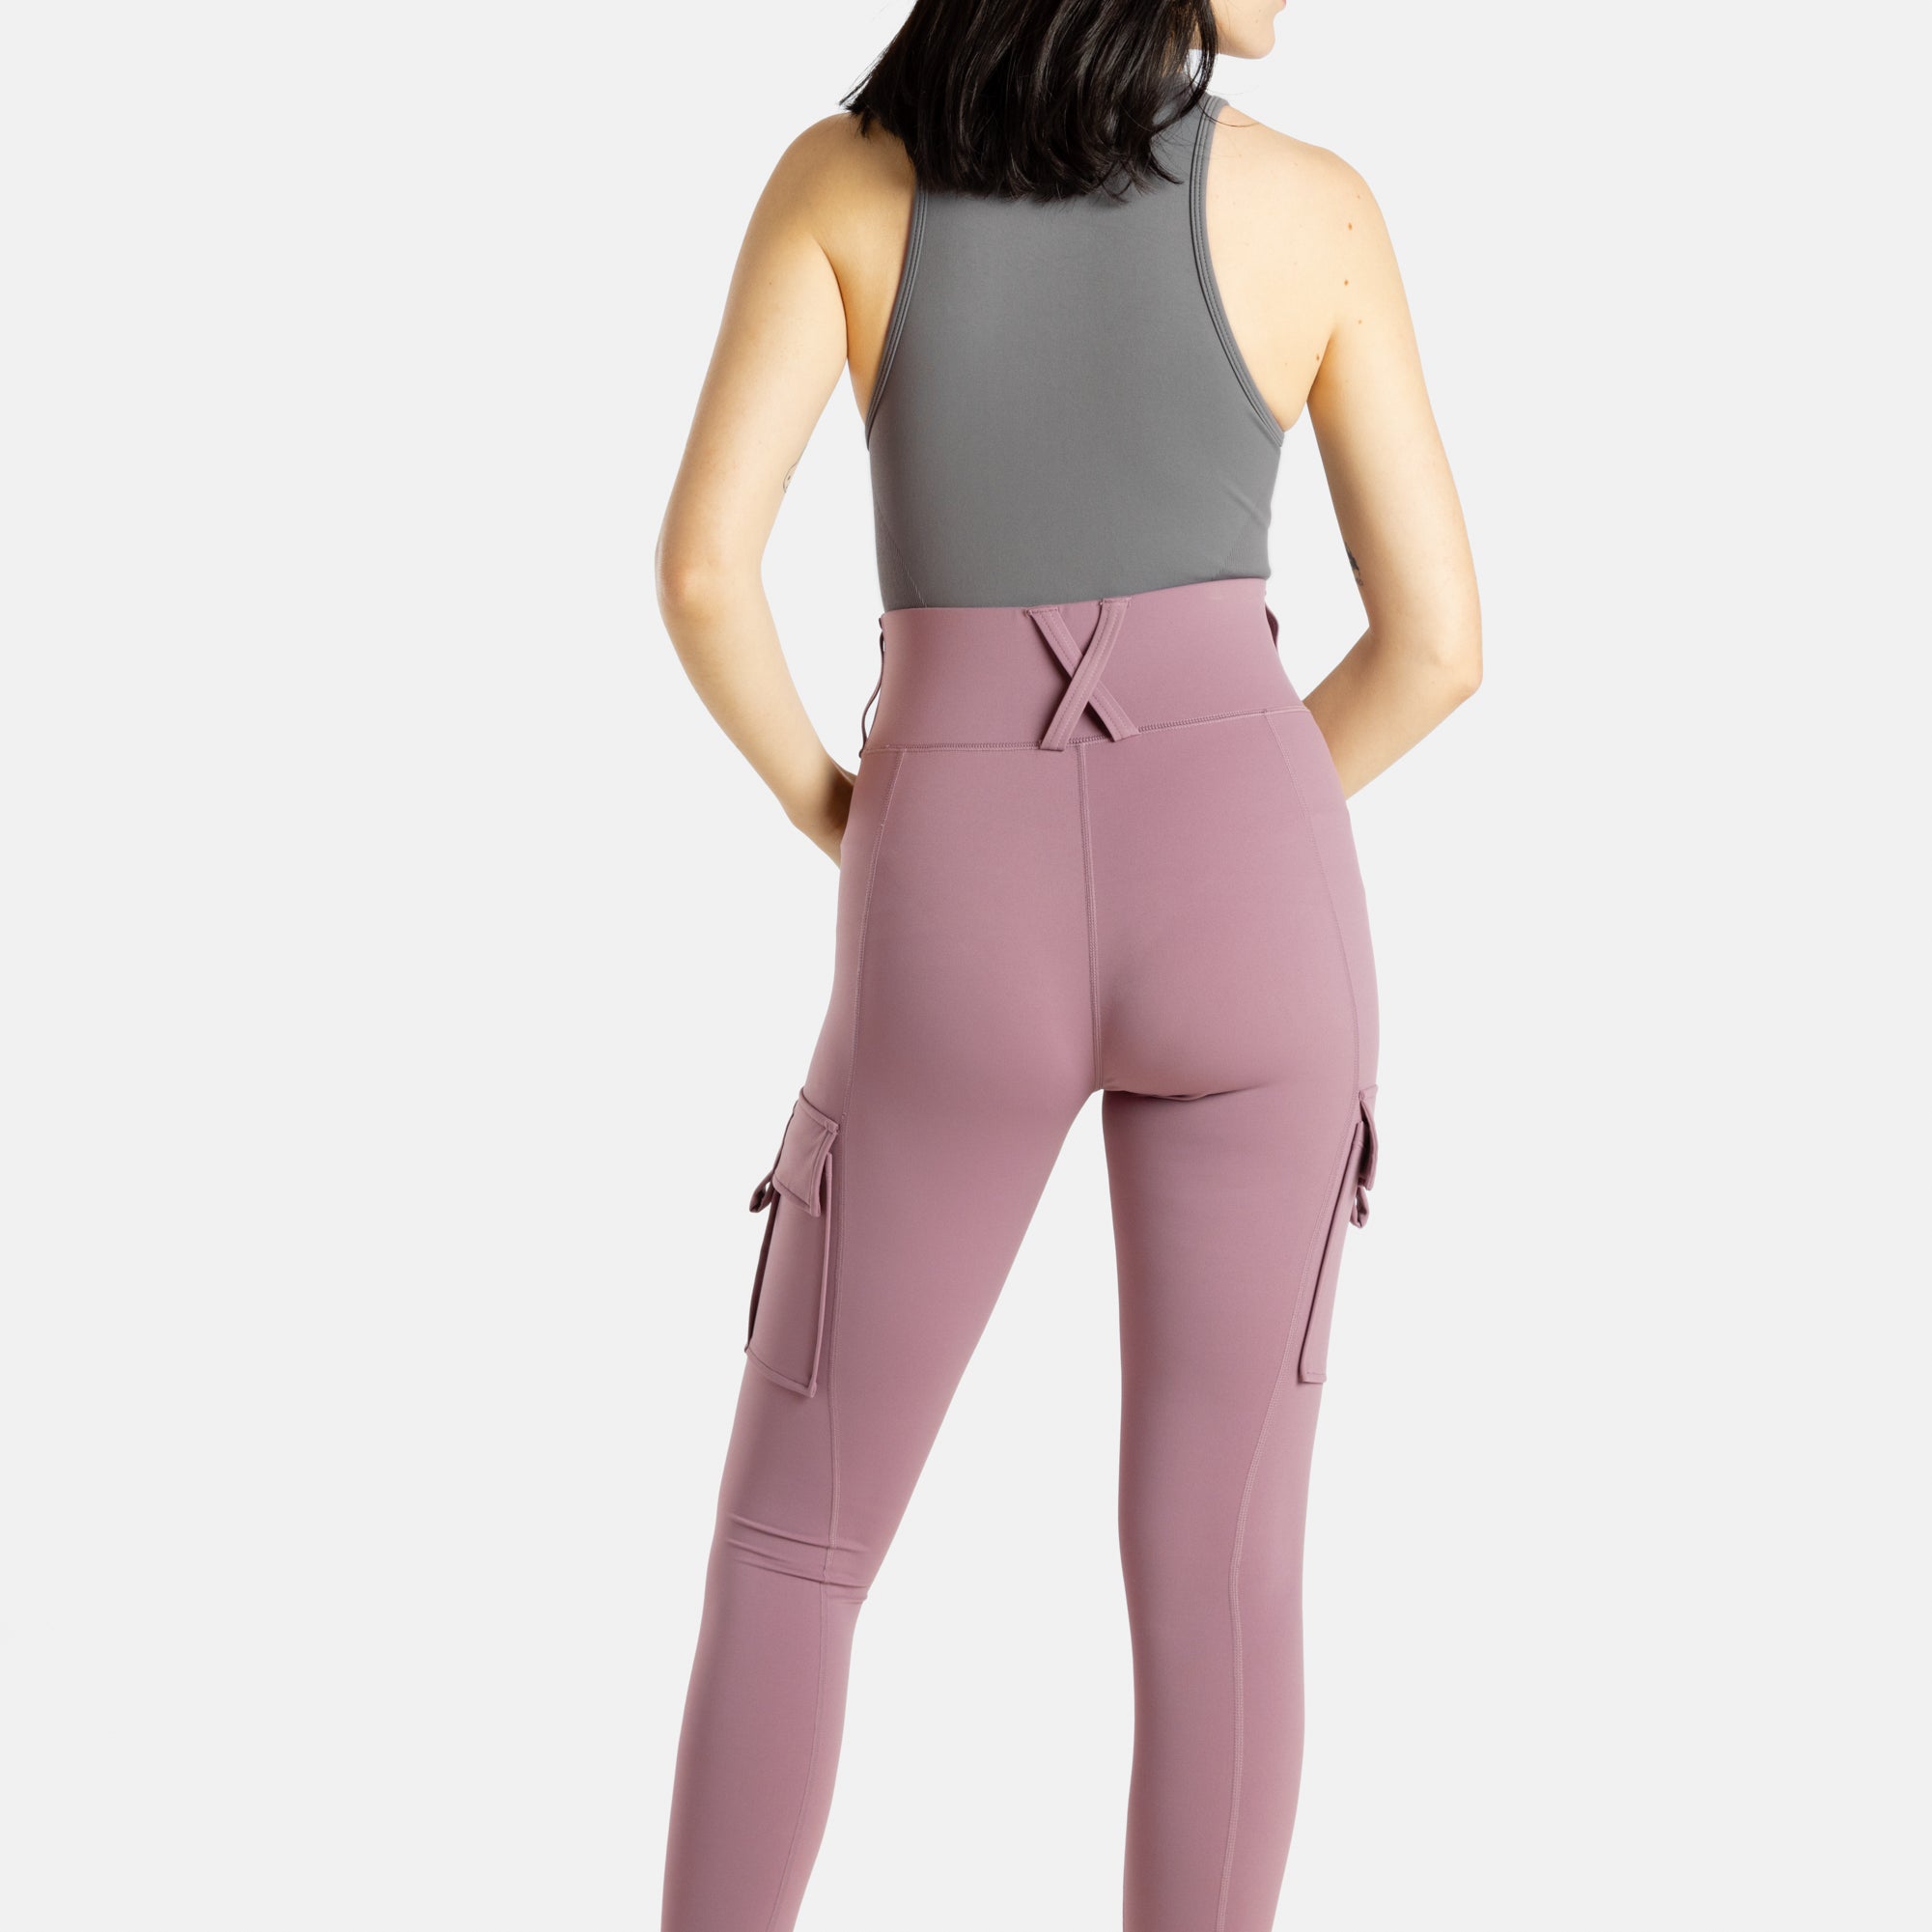 The back of a white woman (with long black hair and hoop earrings) wearing a charcoal tank top and mauve (Pinkish lavender) leggings.